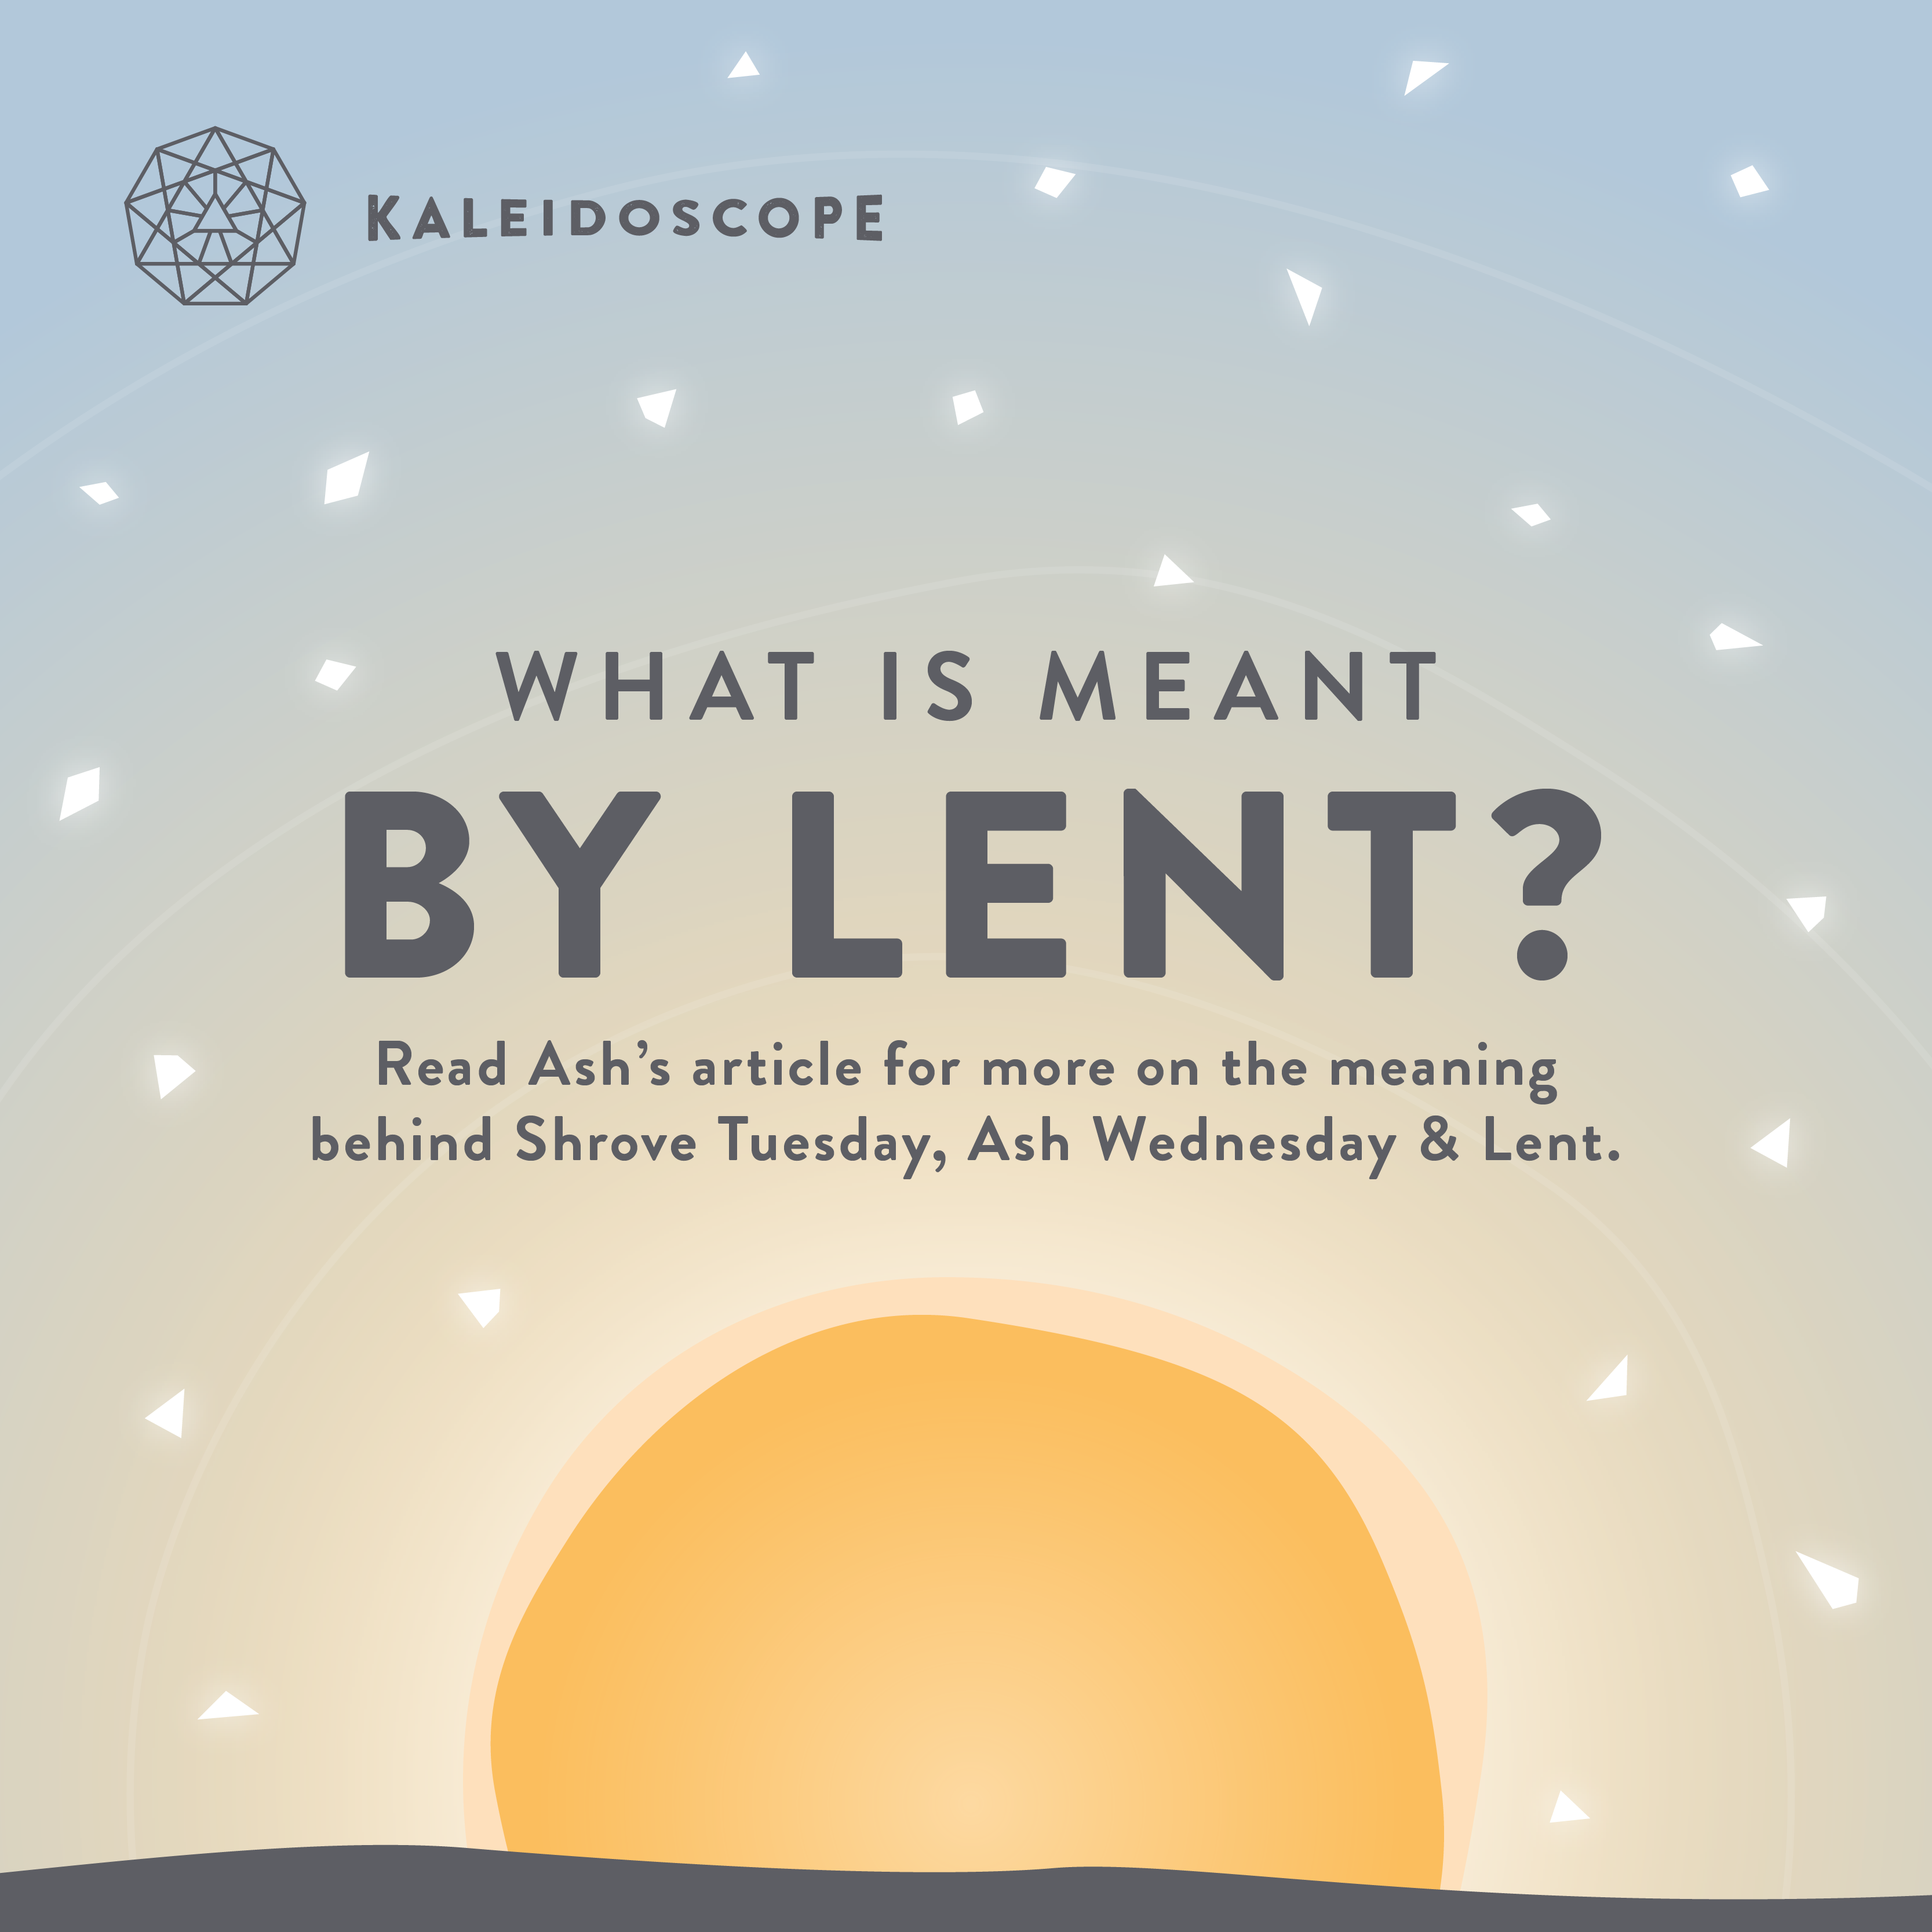 What Is Meant By Lent?